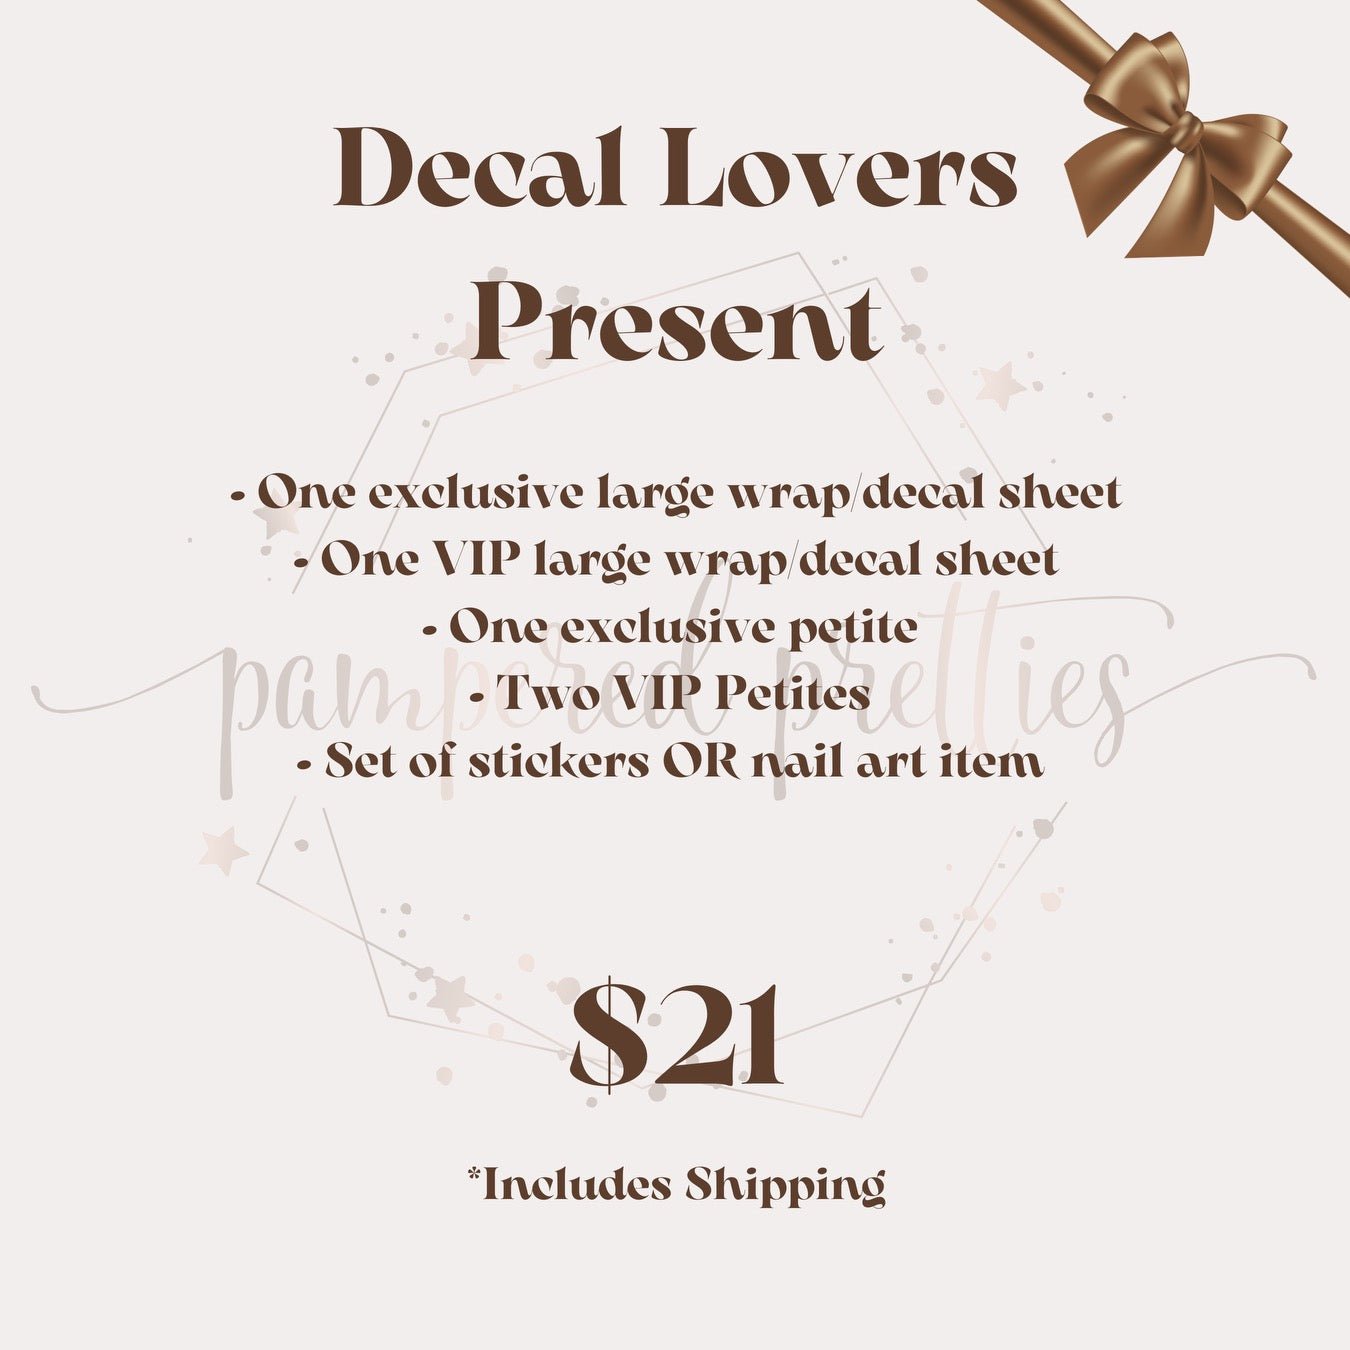 Decal Lovers Present - Pampered Pretties